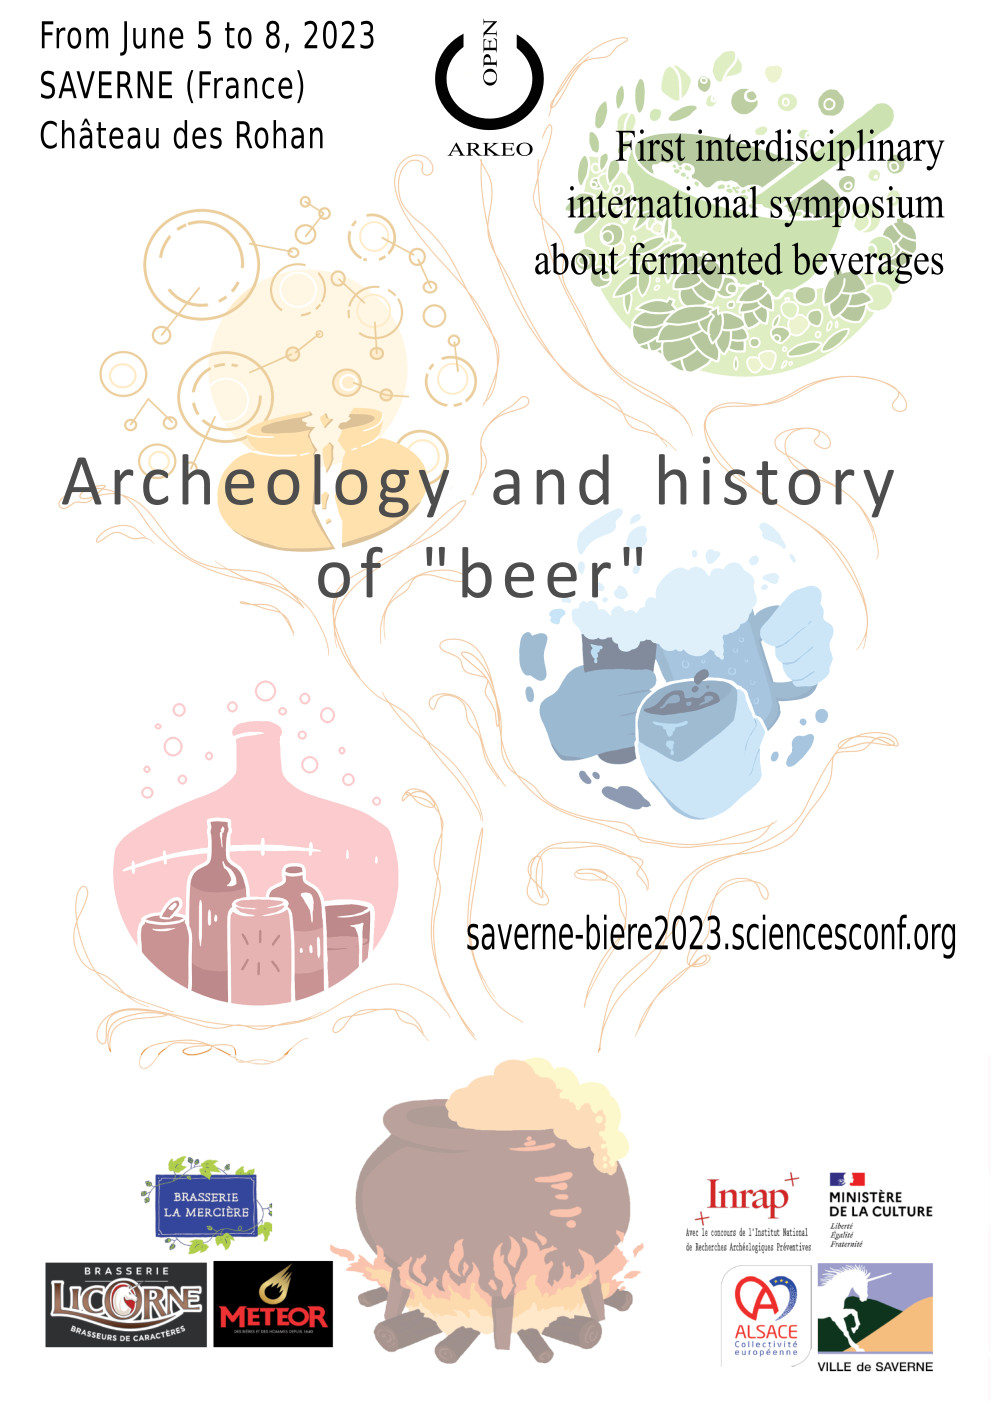 First interdisciplinary international symposium about fermented beverages, from June 5 to 8, 2023 in Saverne (France)